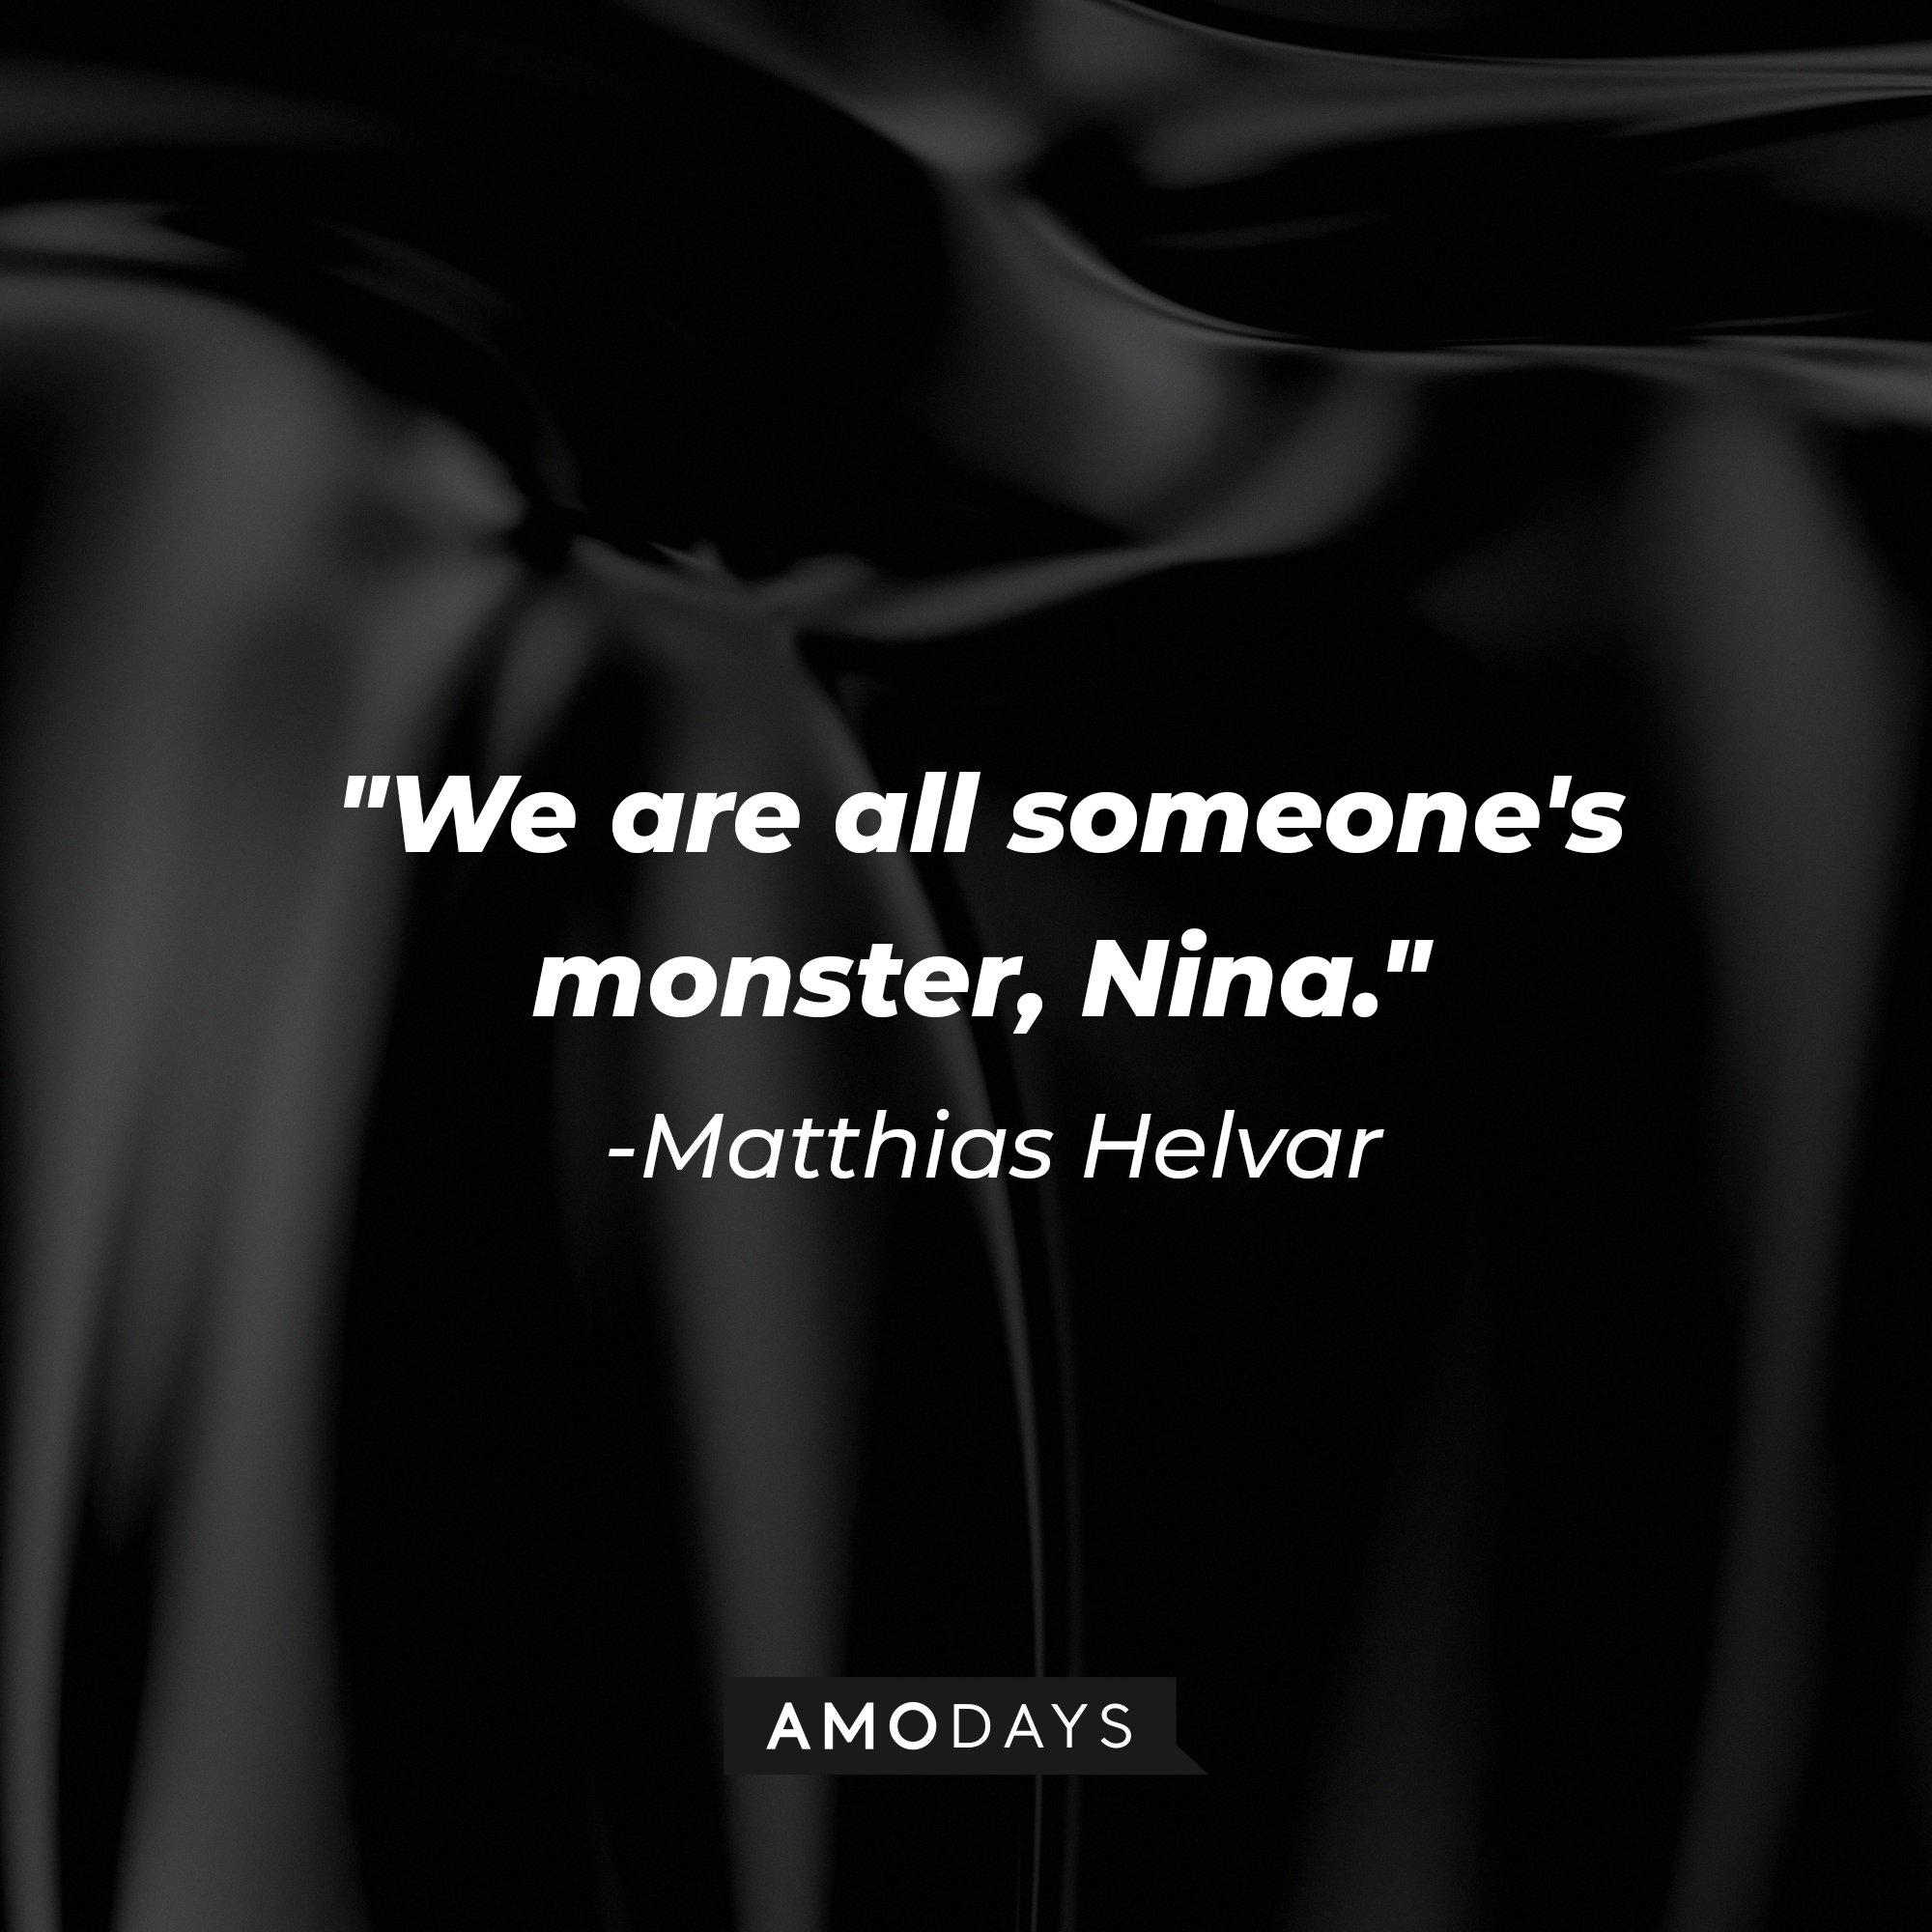 Matthias Helvar’s quote: "We are all someone's monster, Nina." | Image: AmoDays